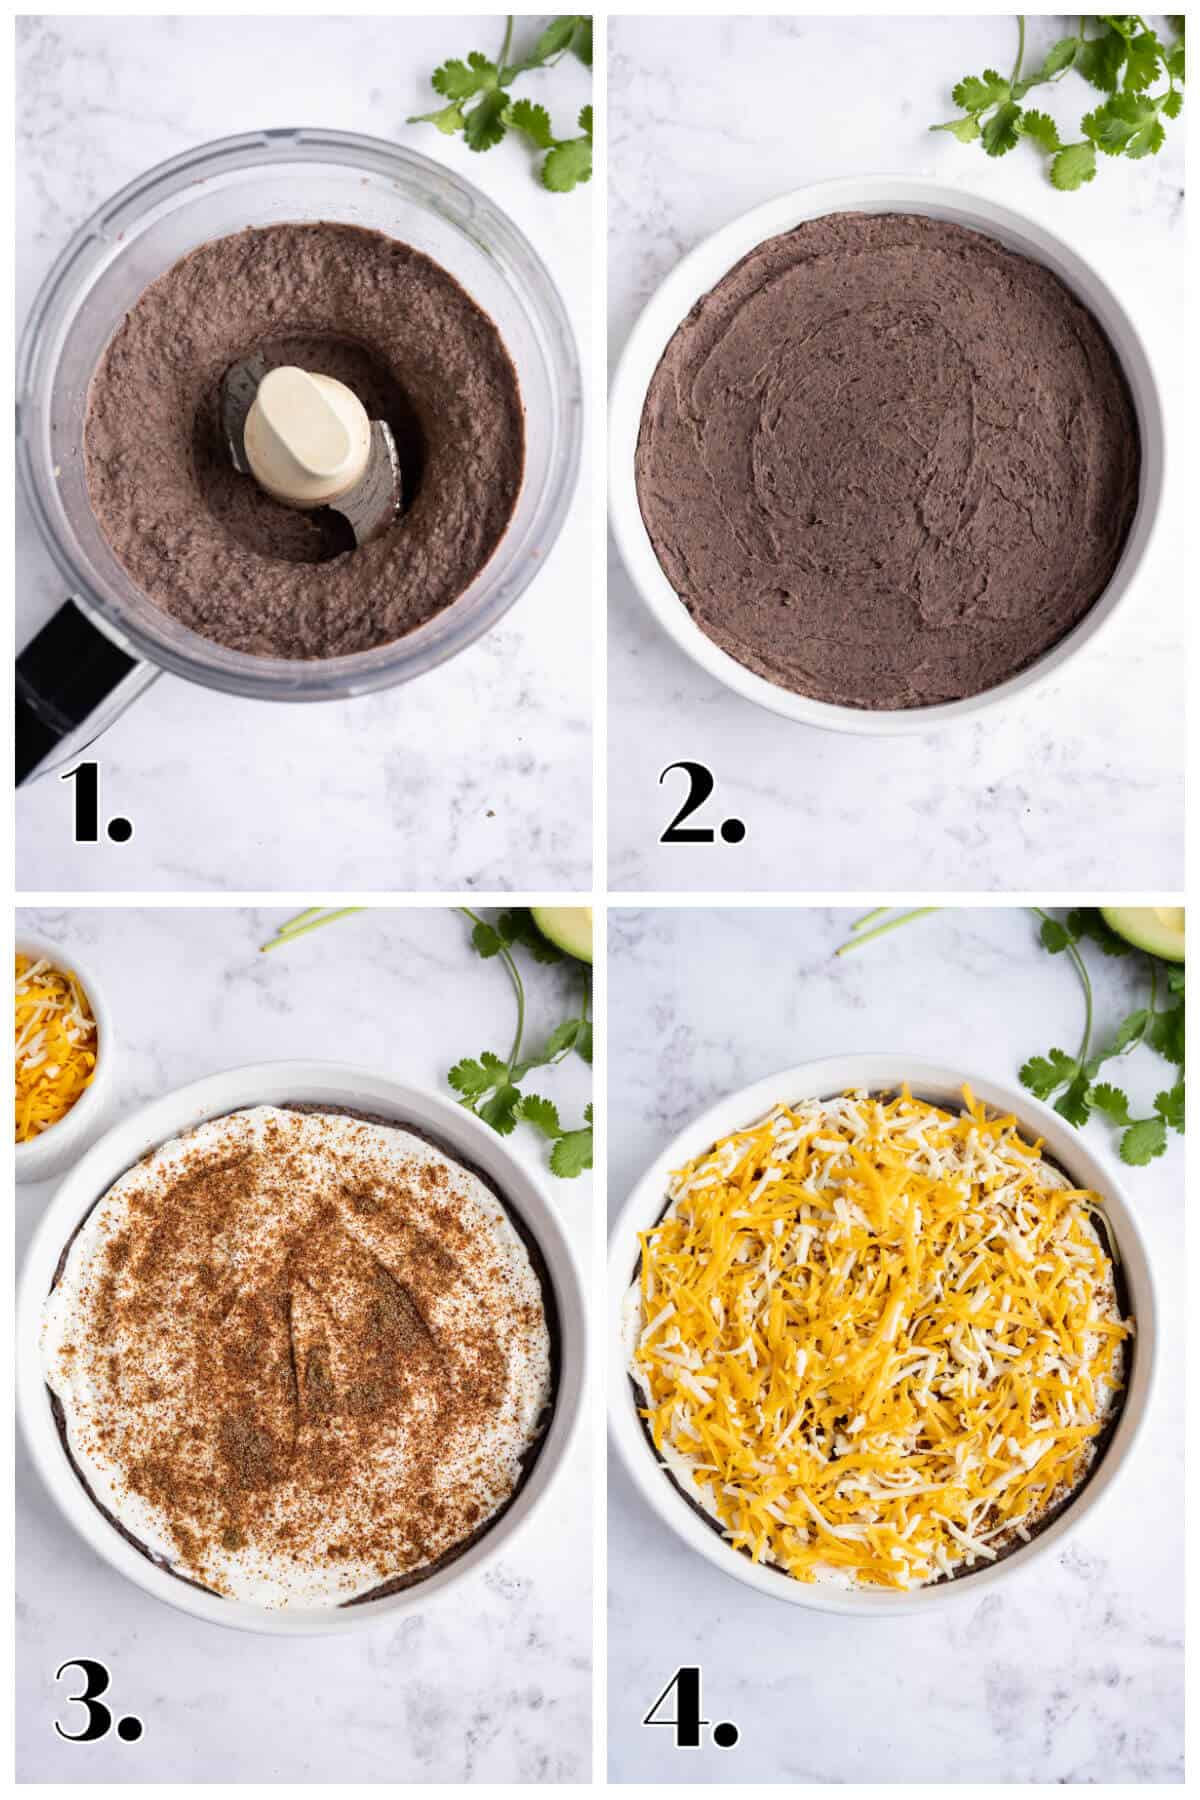 4 image collage showing how to assemble black bean dip. 1. processed prepared beans in a food processor; 2. mashed black beans in a round pie plate; 3. a layer of greek yogurt and spices; 4. the final layer of shredded cheese.